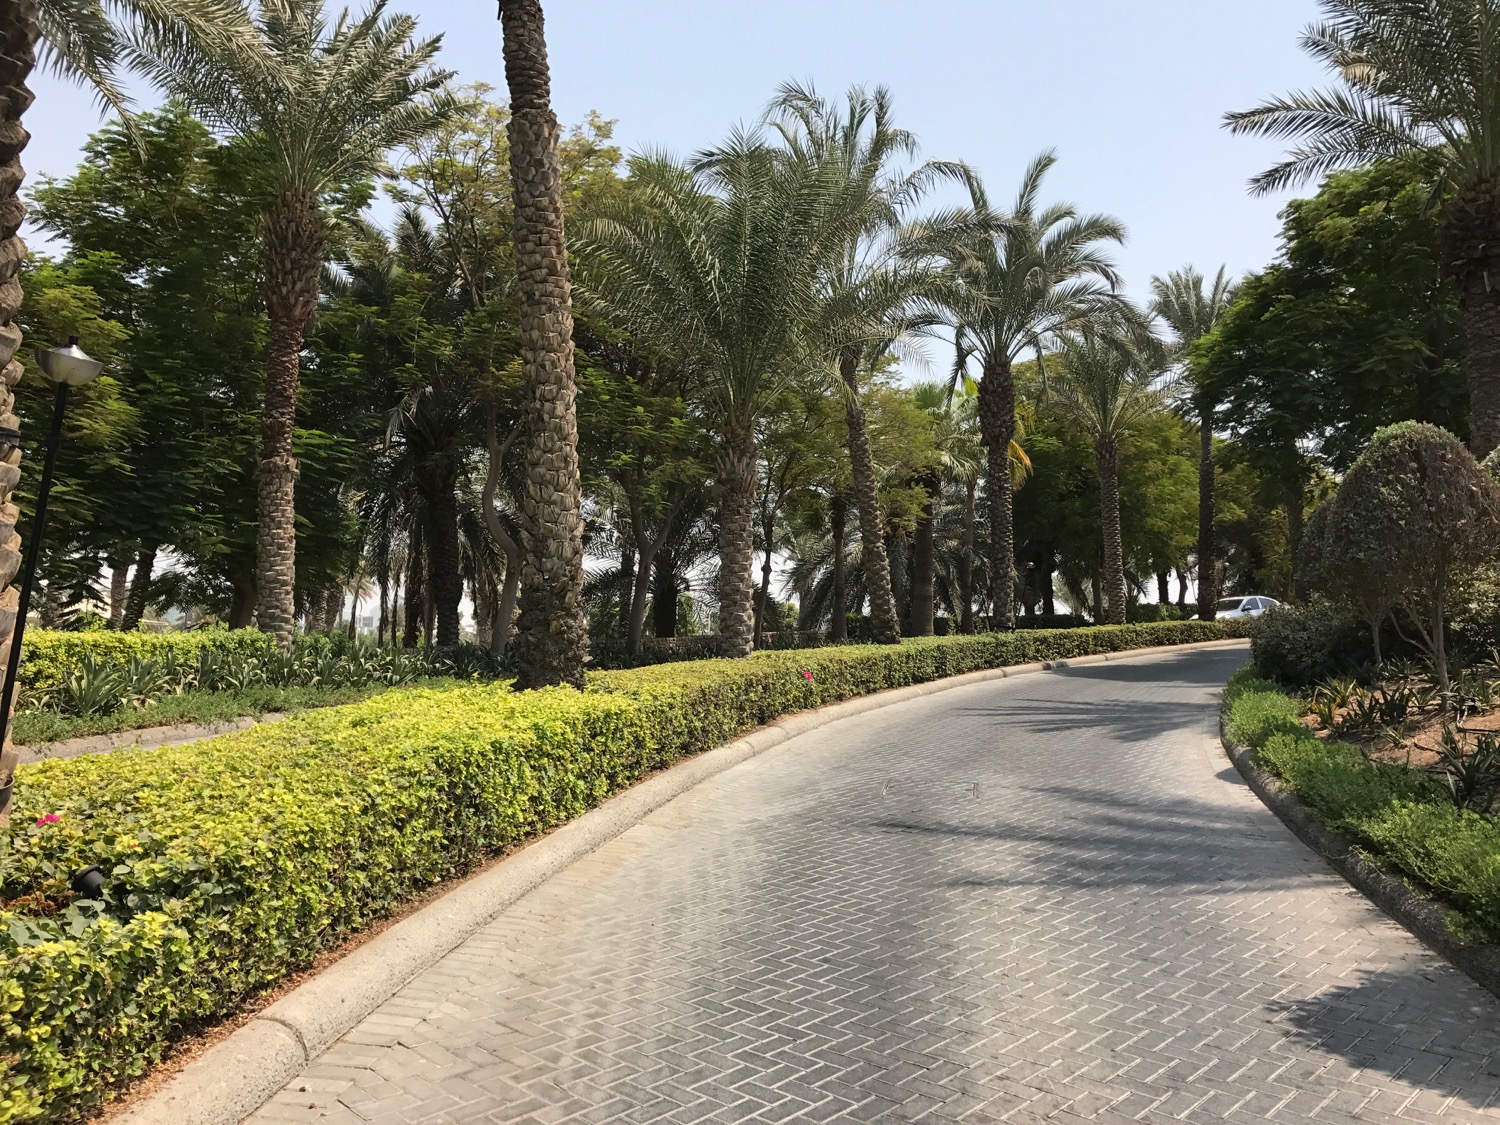 a road with palm trees and bushes